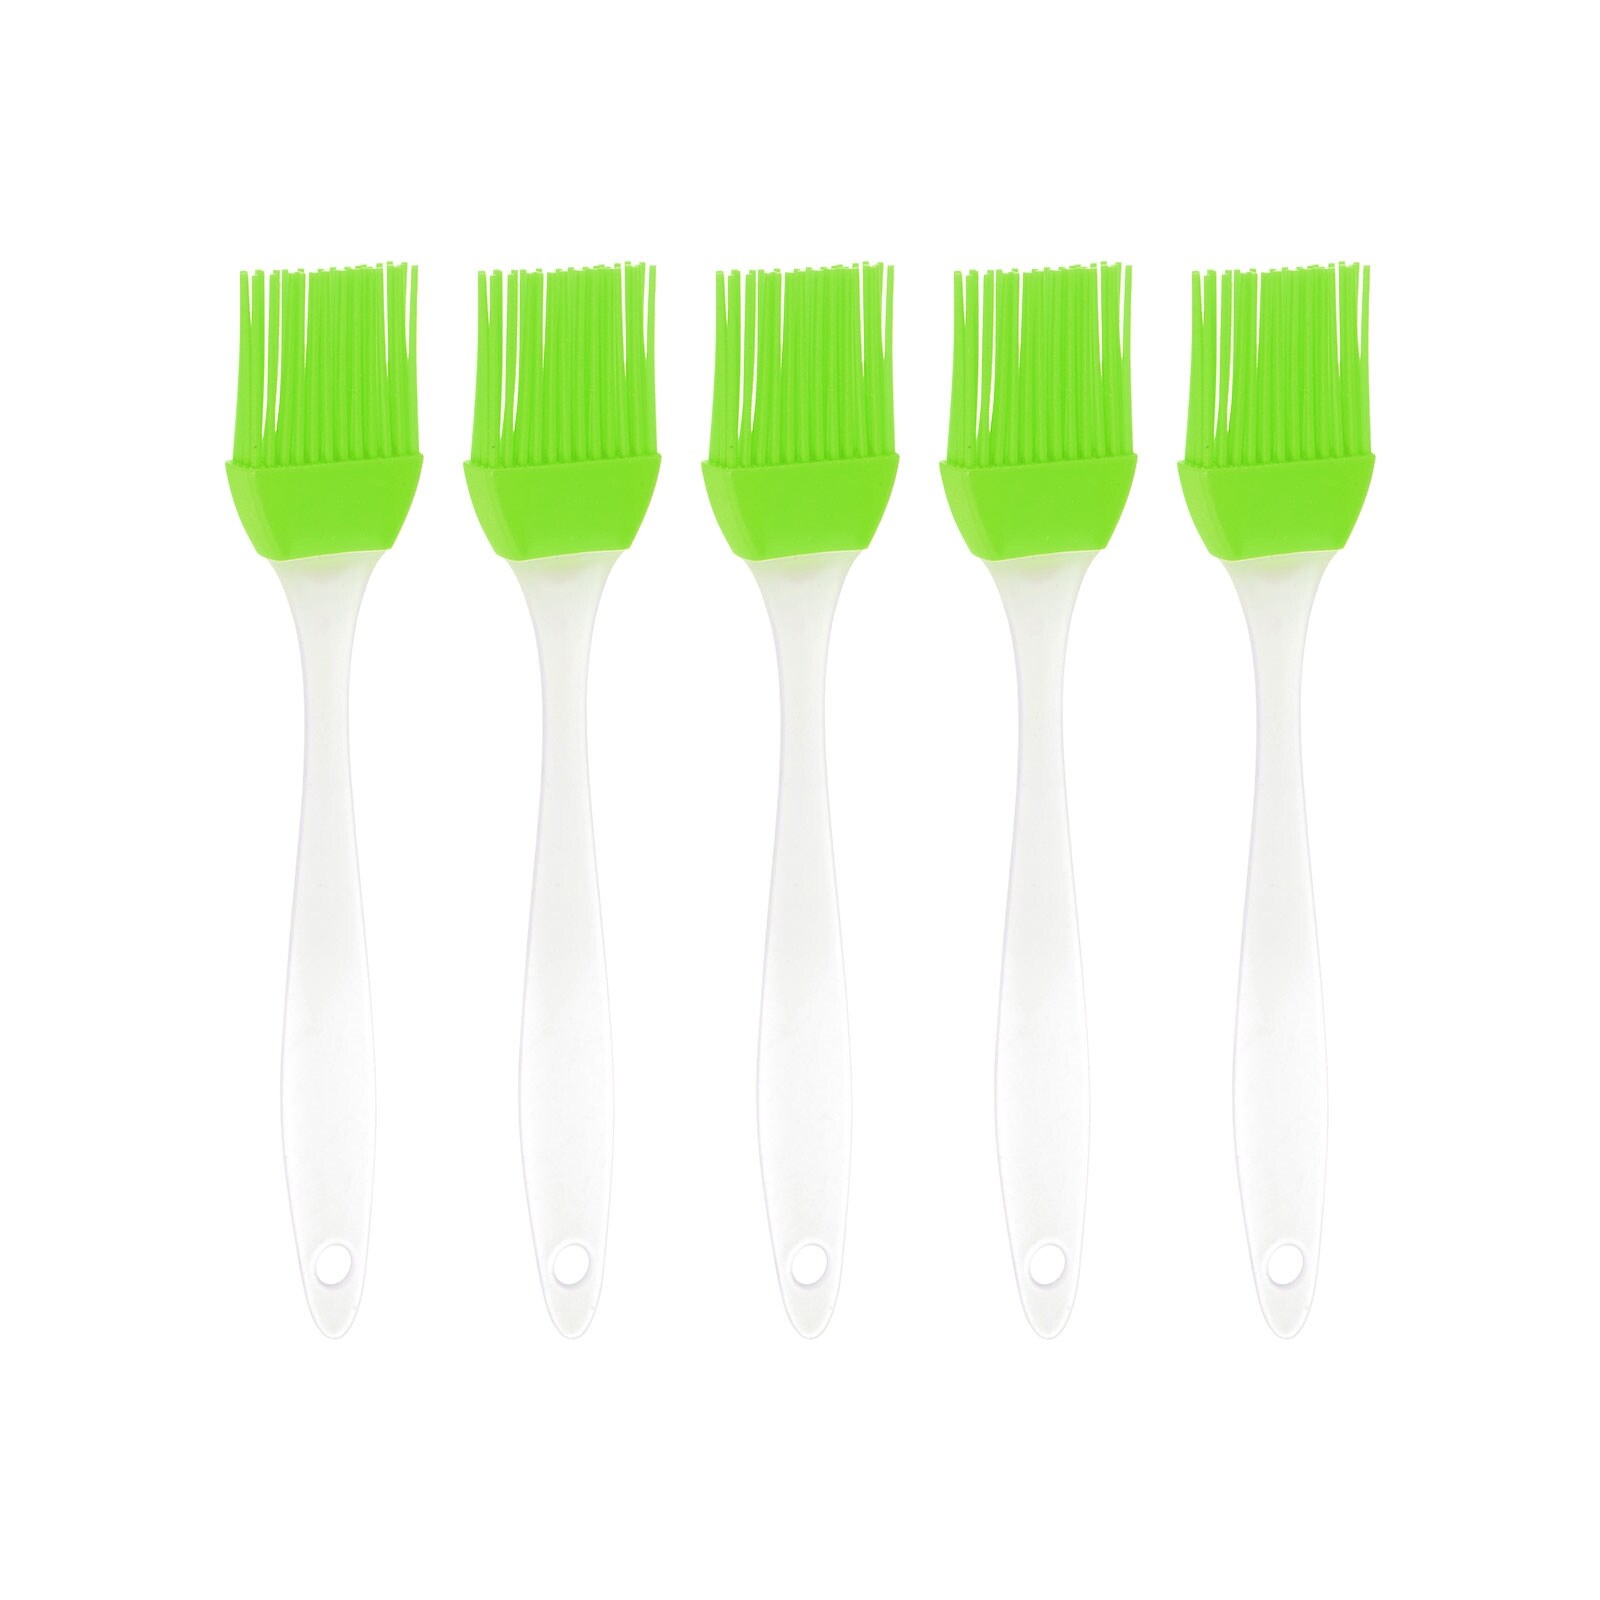 https://ak1.ostkcdn.com/images/products/is/images/direct/1b38158a99433f5b1d1451f42c26ba90da5f83e5/10pcs-Silicone-Pastry-Brush%2C-1.18%22x6.3%22-Detachable-Basting-Oil-Tool%2C-Green.jpg